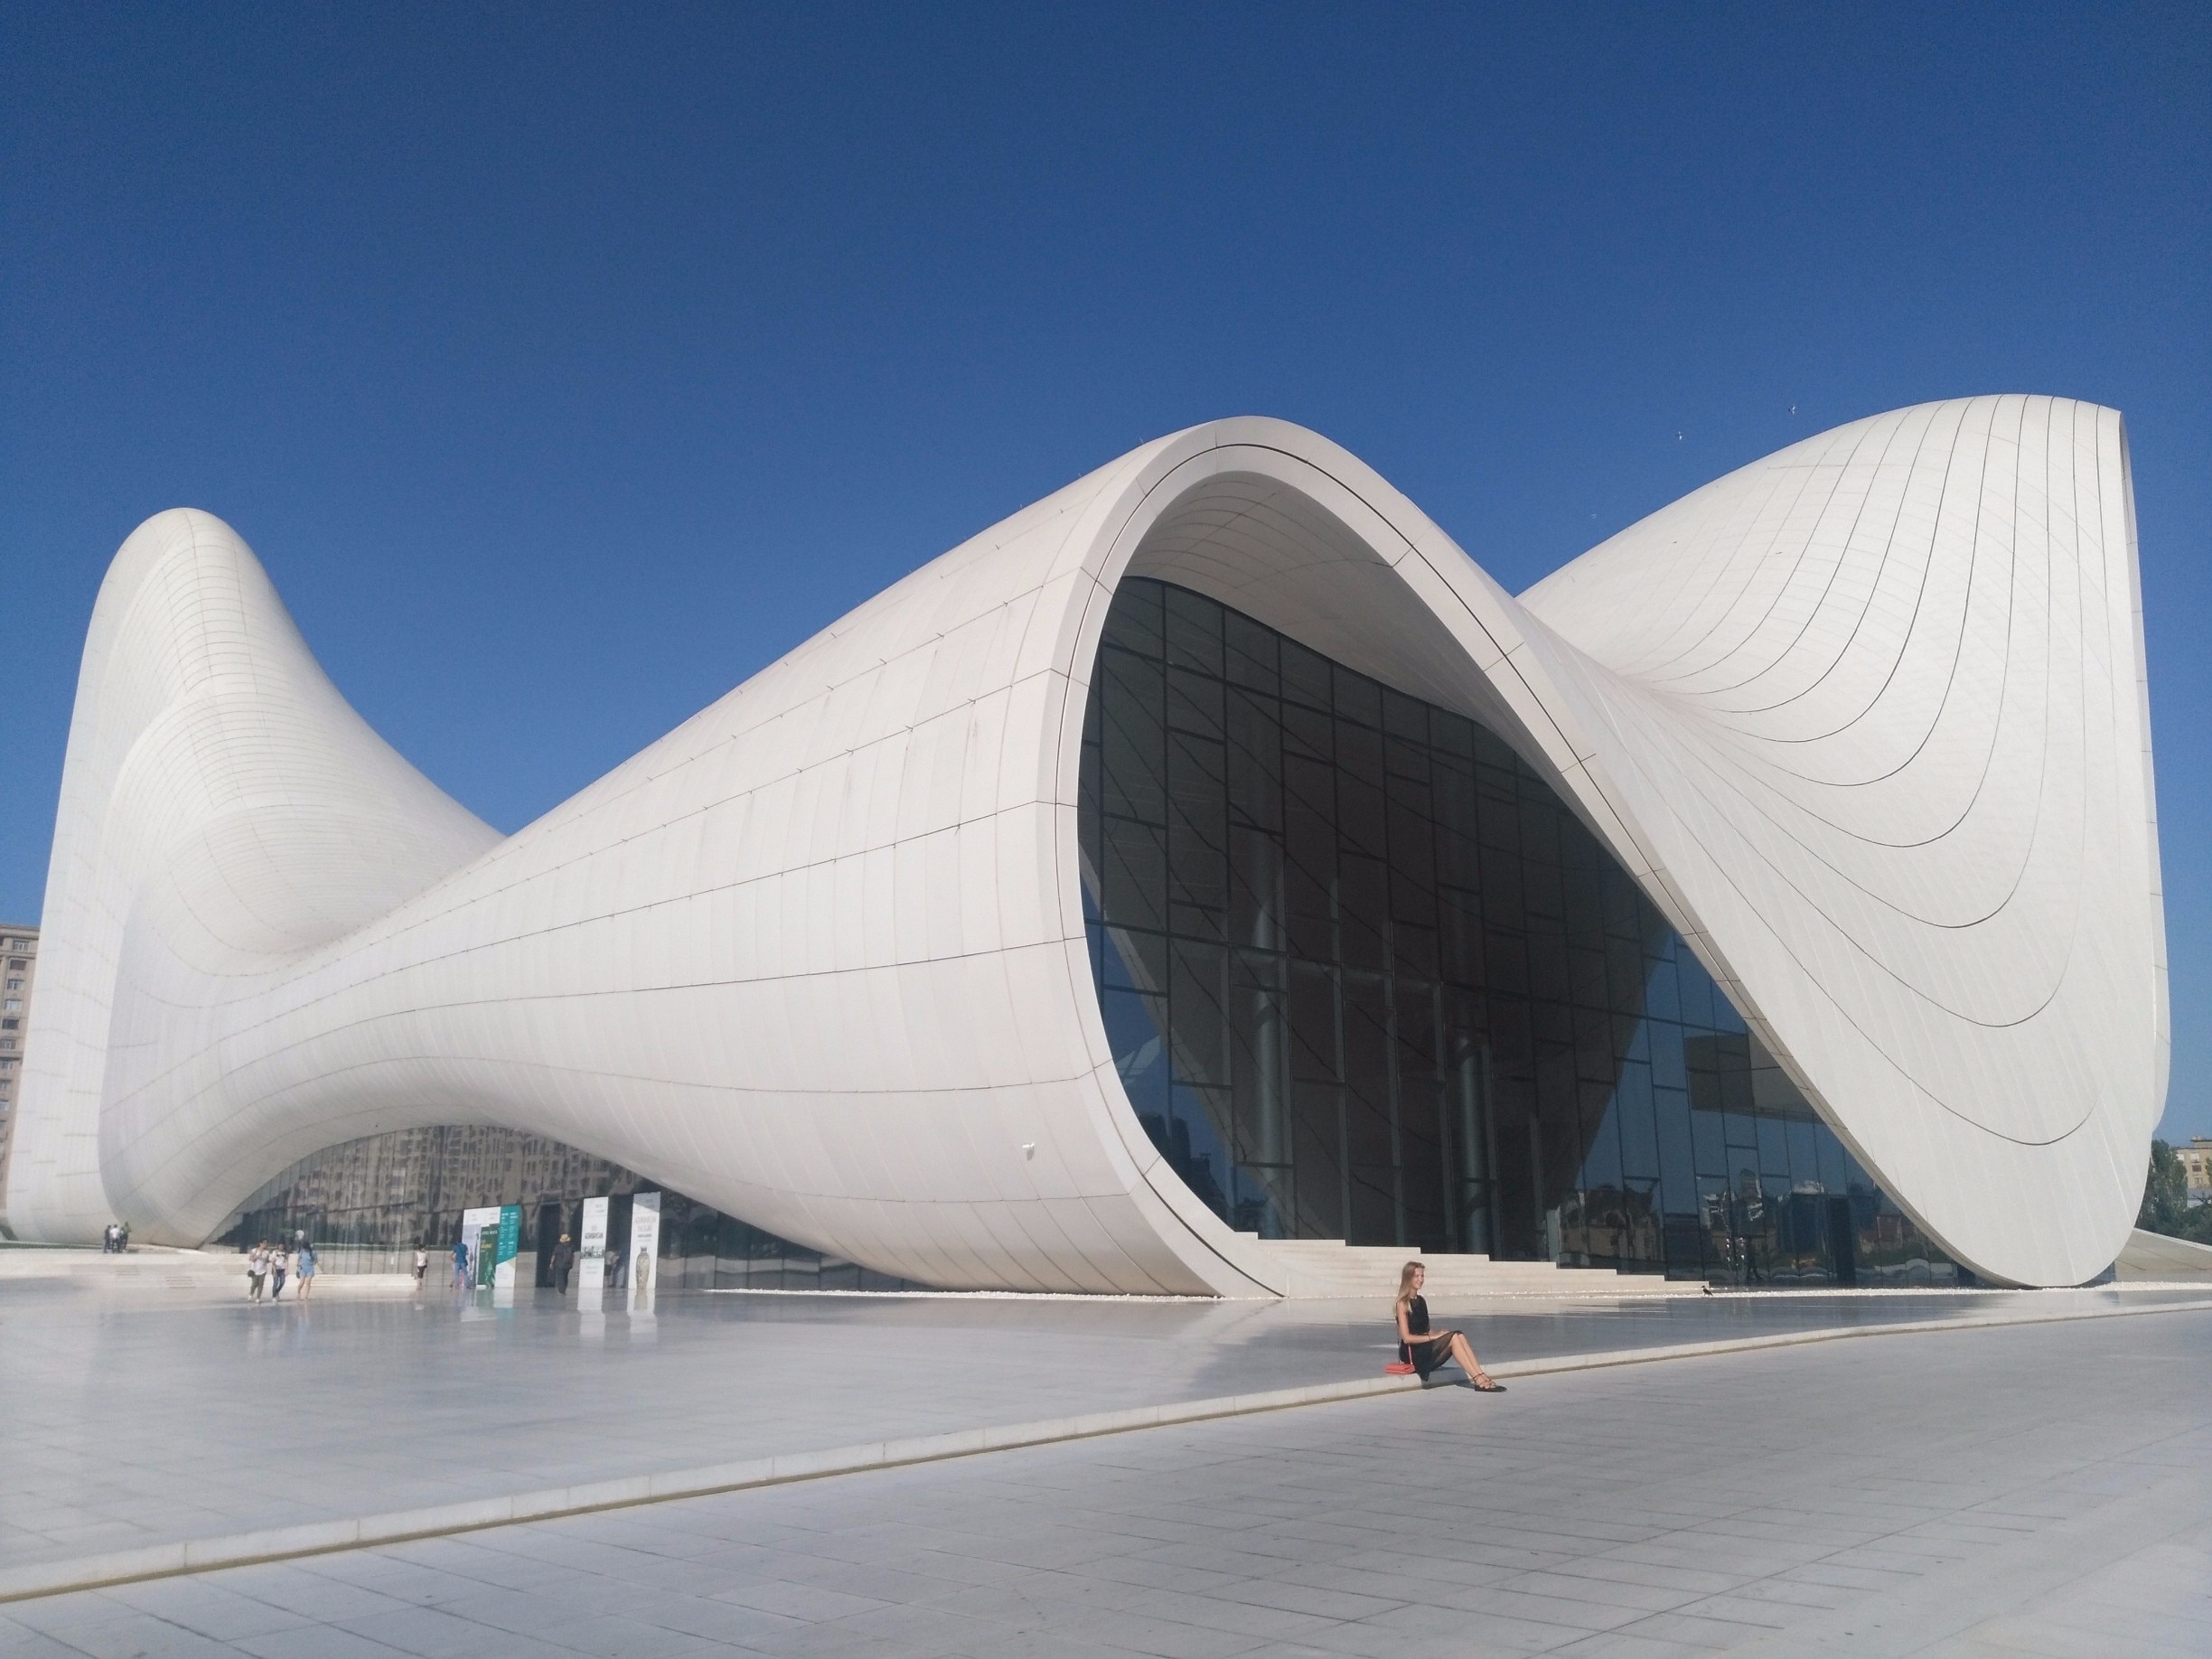 The Heydar Aliyev Center in Baku, Azerbajan was voted the Best Building in the world in 2014 in category Design of the Year. It was designed by Zaha Hadid and a must visit in the city. When we were there it was +40 degrees - very difficult to move around in the sunshine. #LifeAtExpedia 